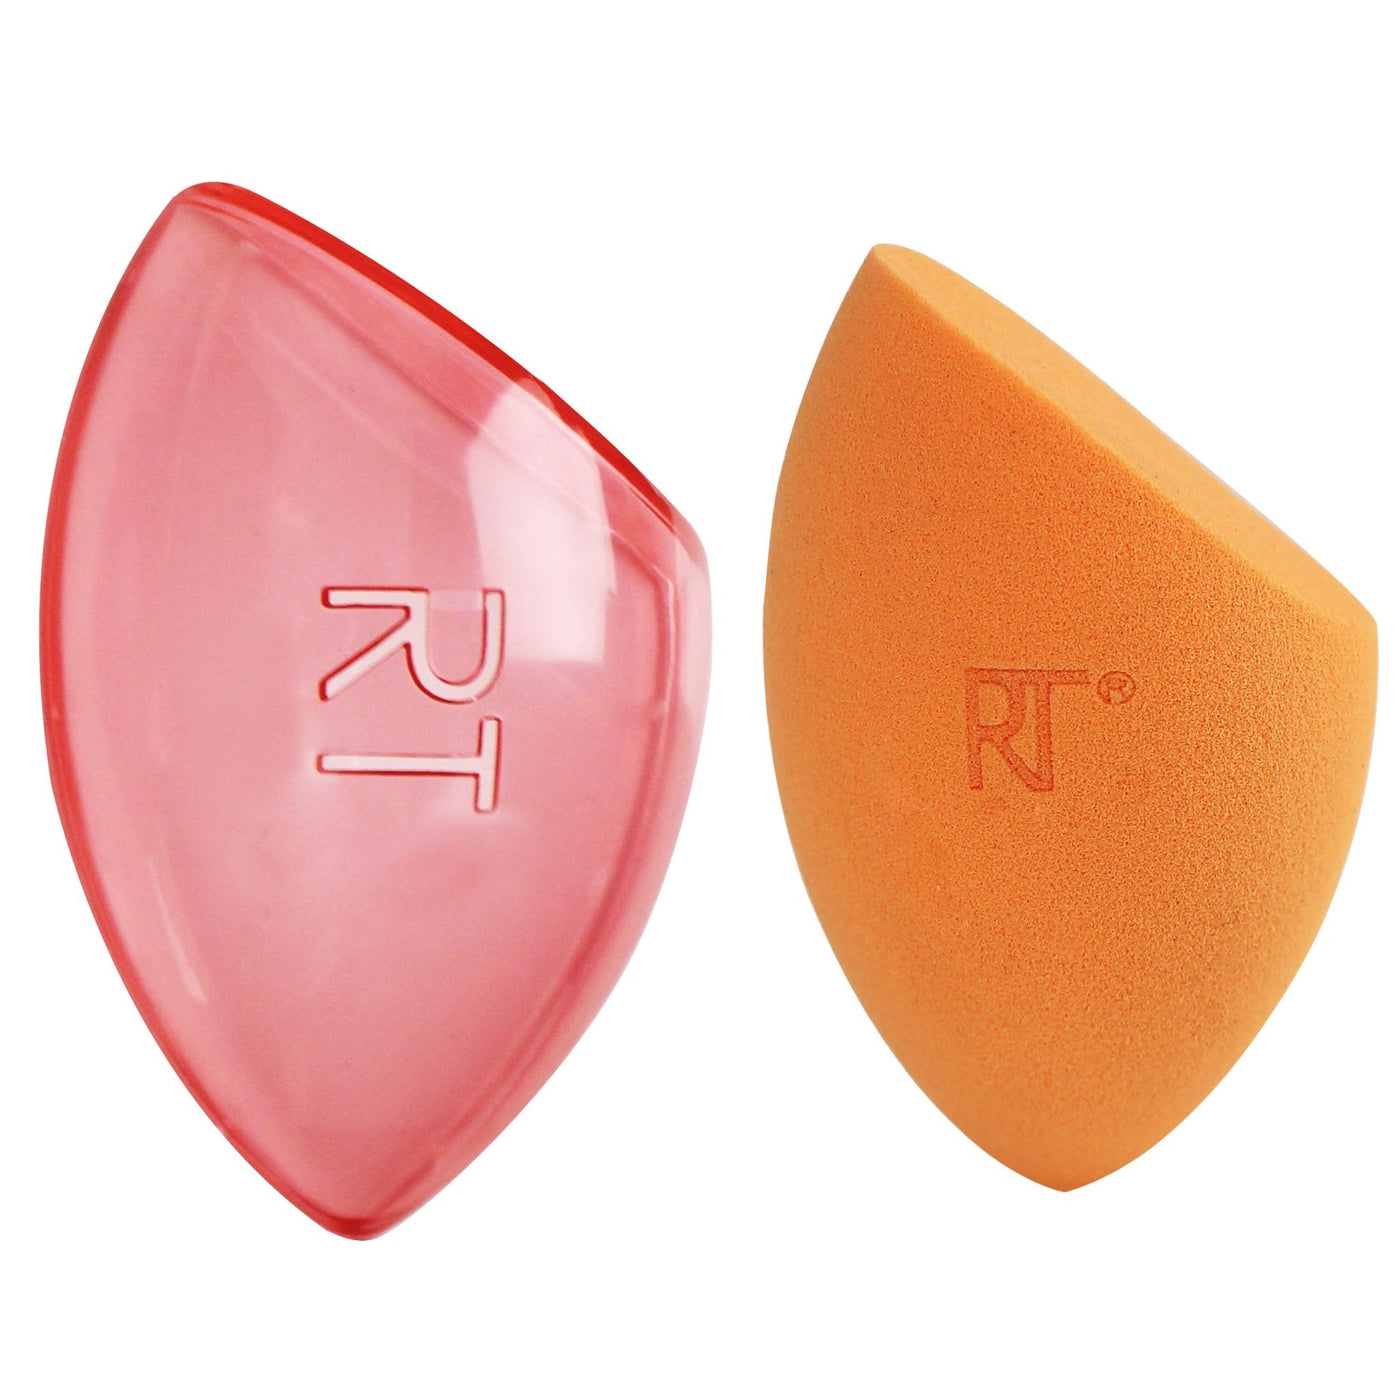 Real Techniques Miracle Complexion Sponge and Case - Hey Sara